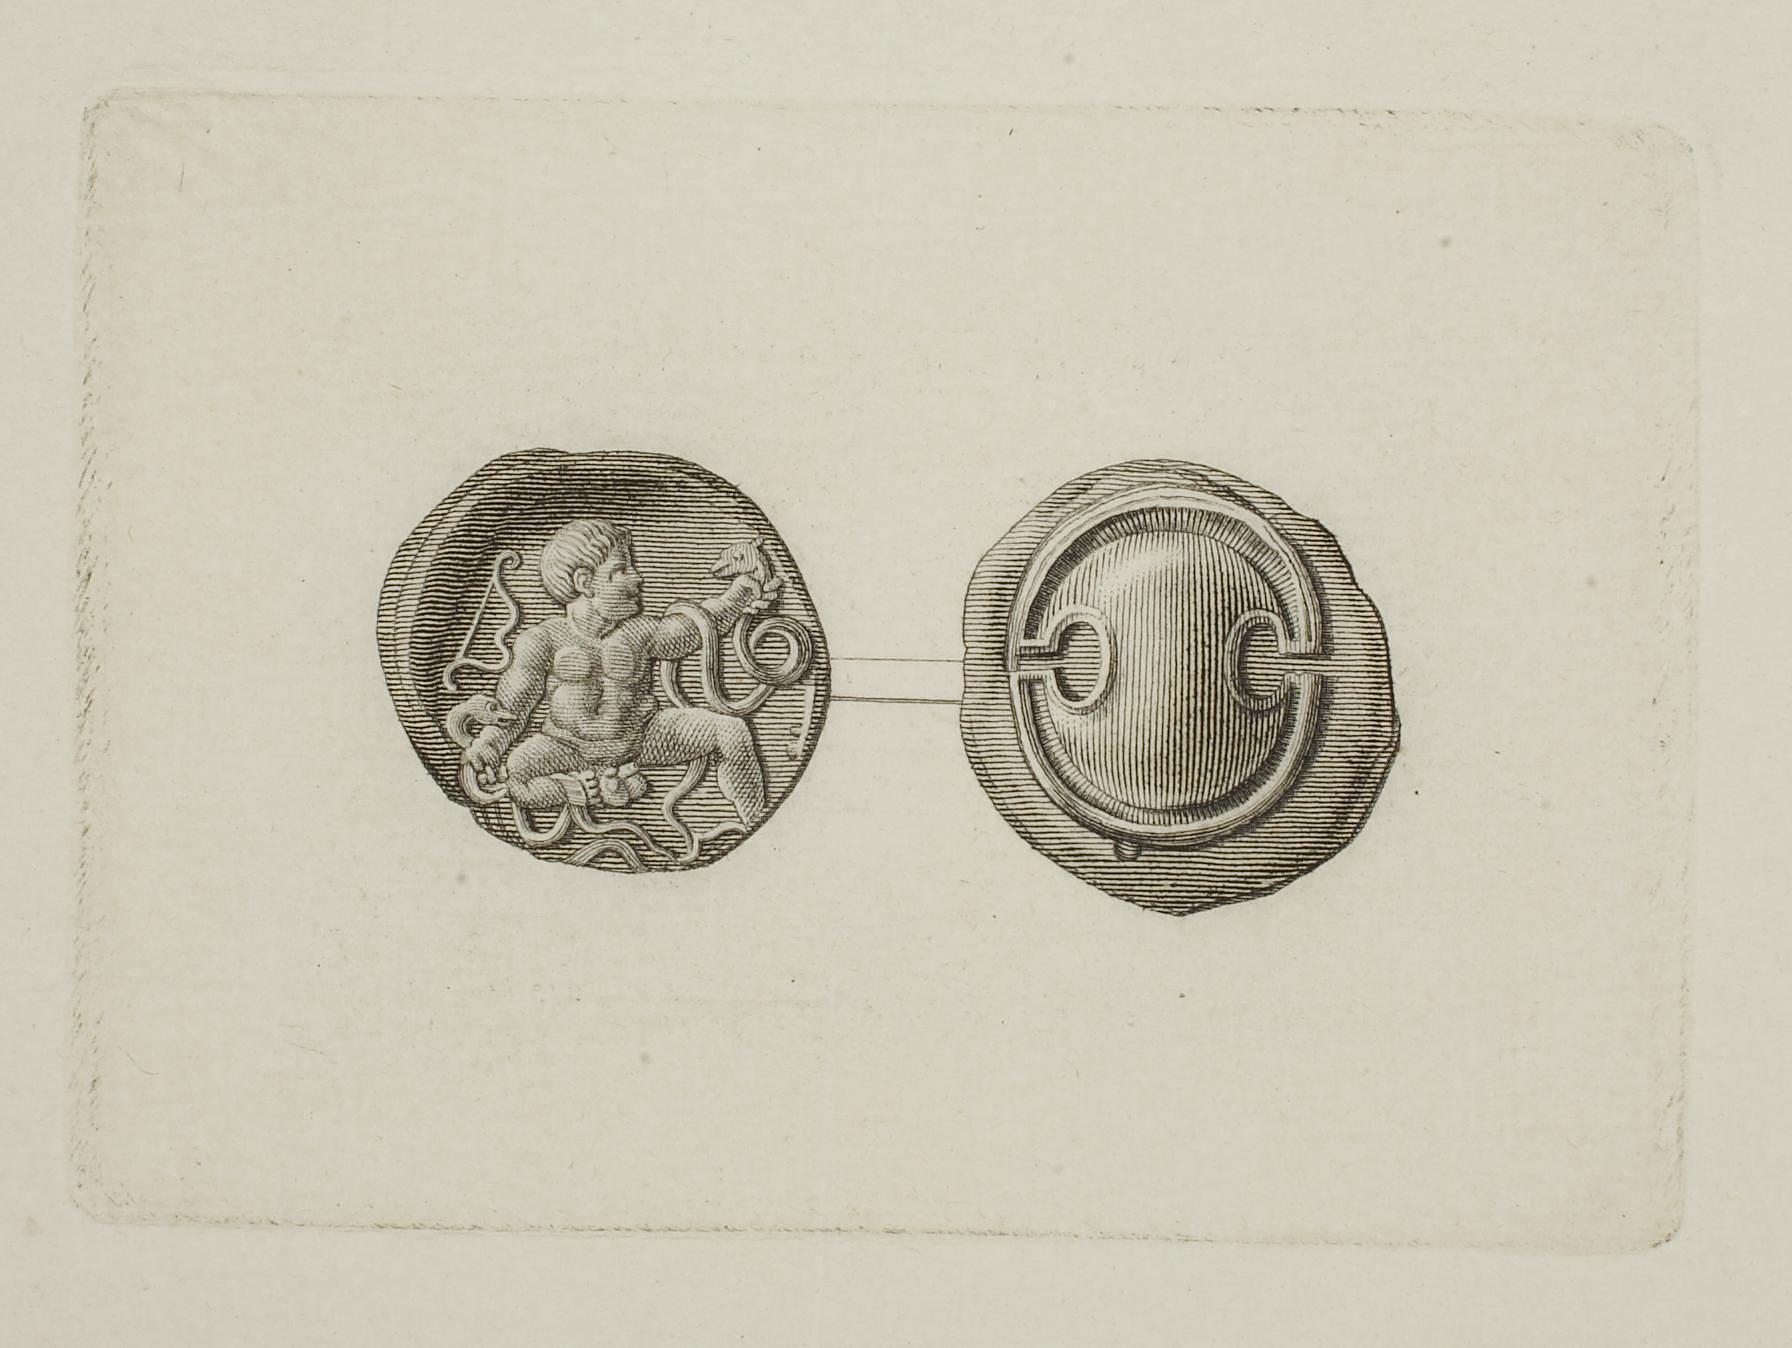 Greek coins obverse and reverse, E1569